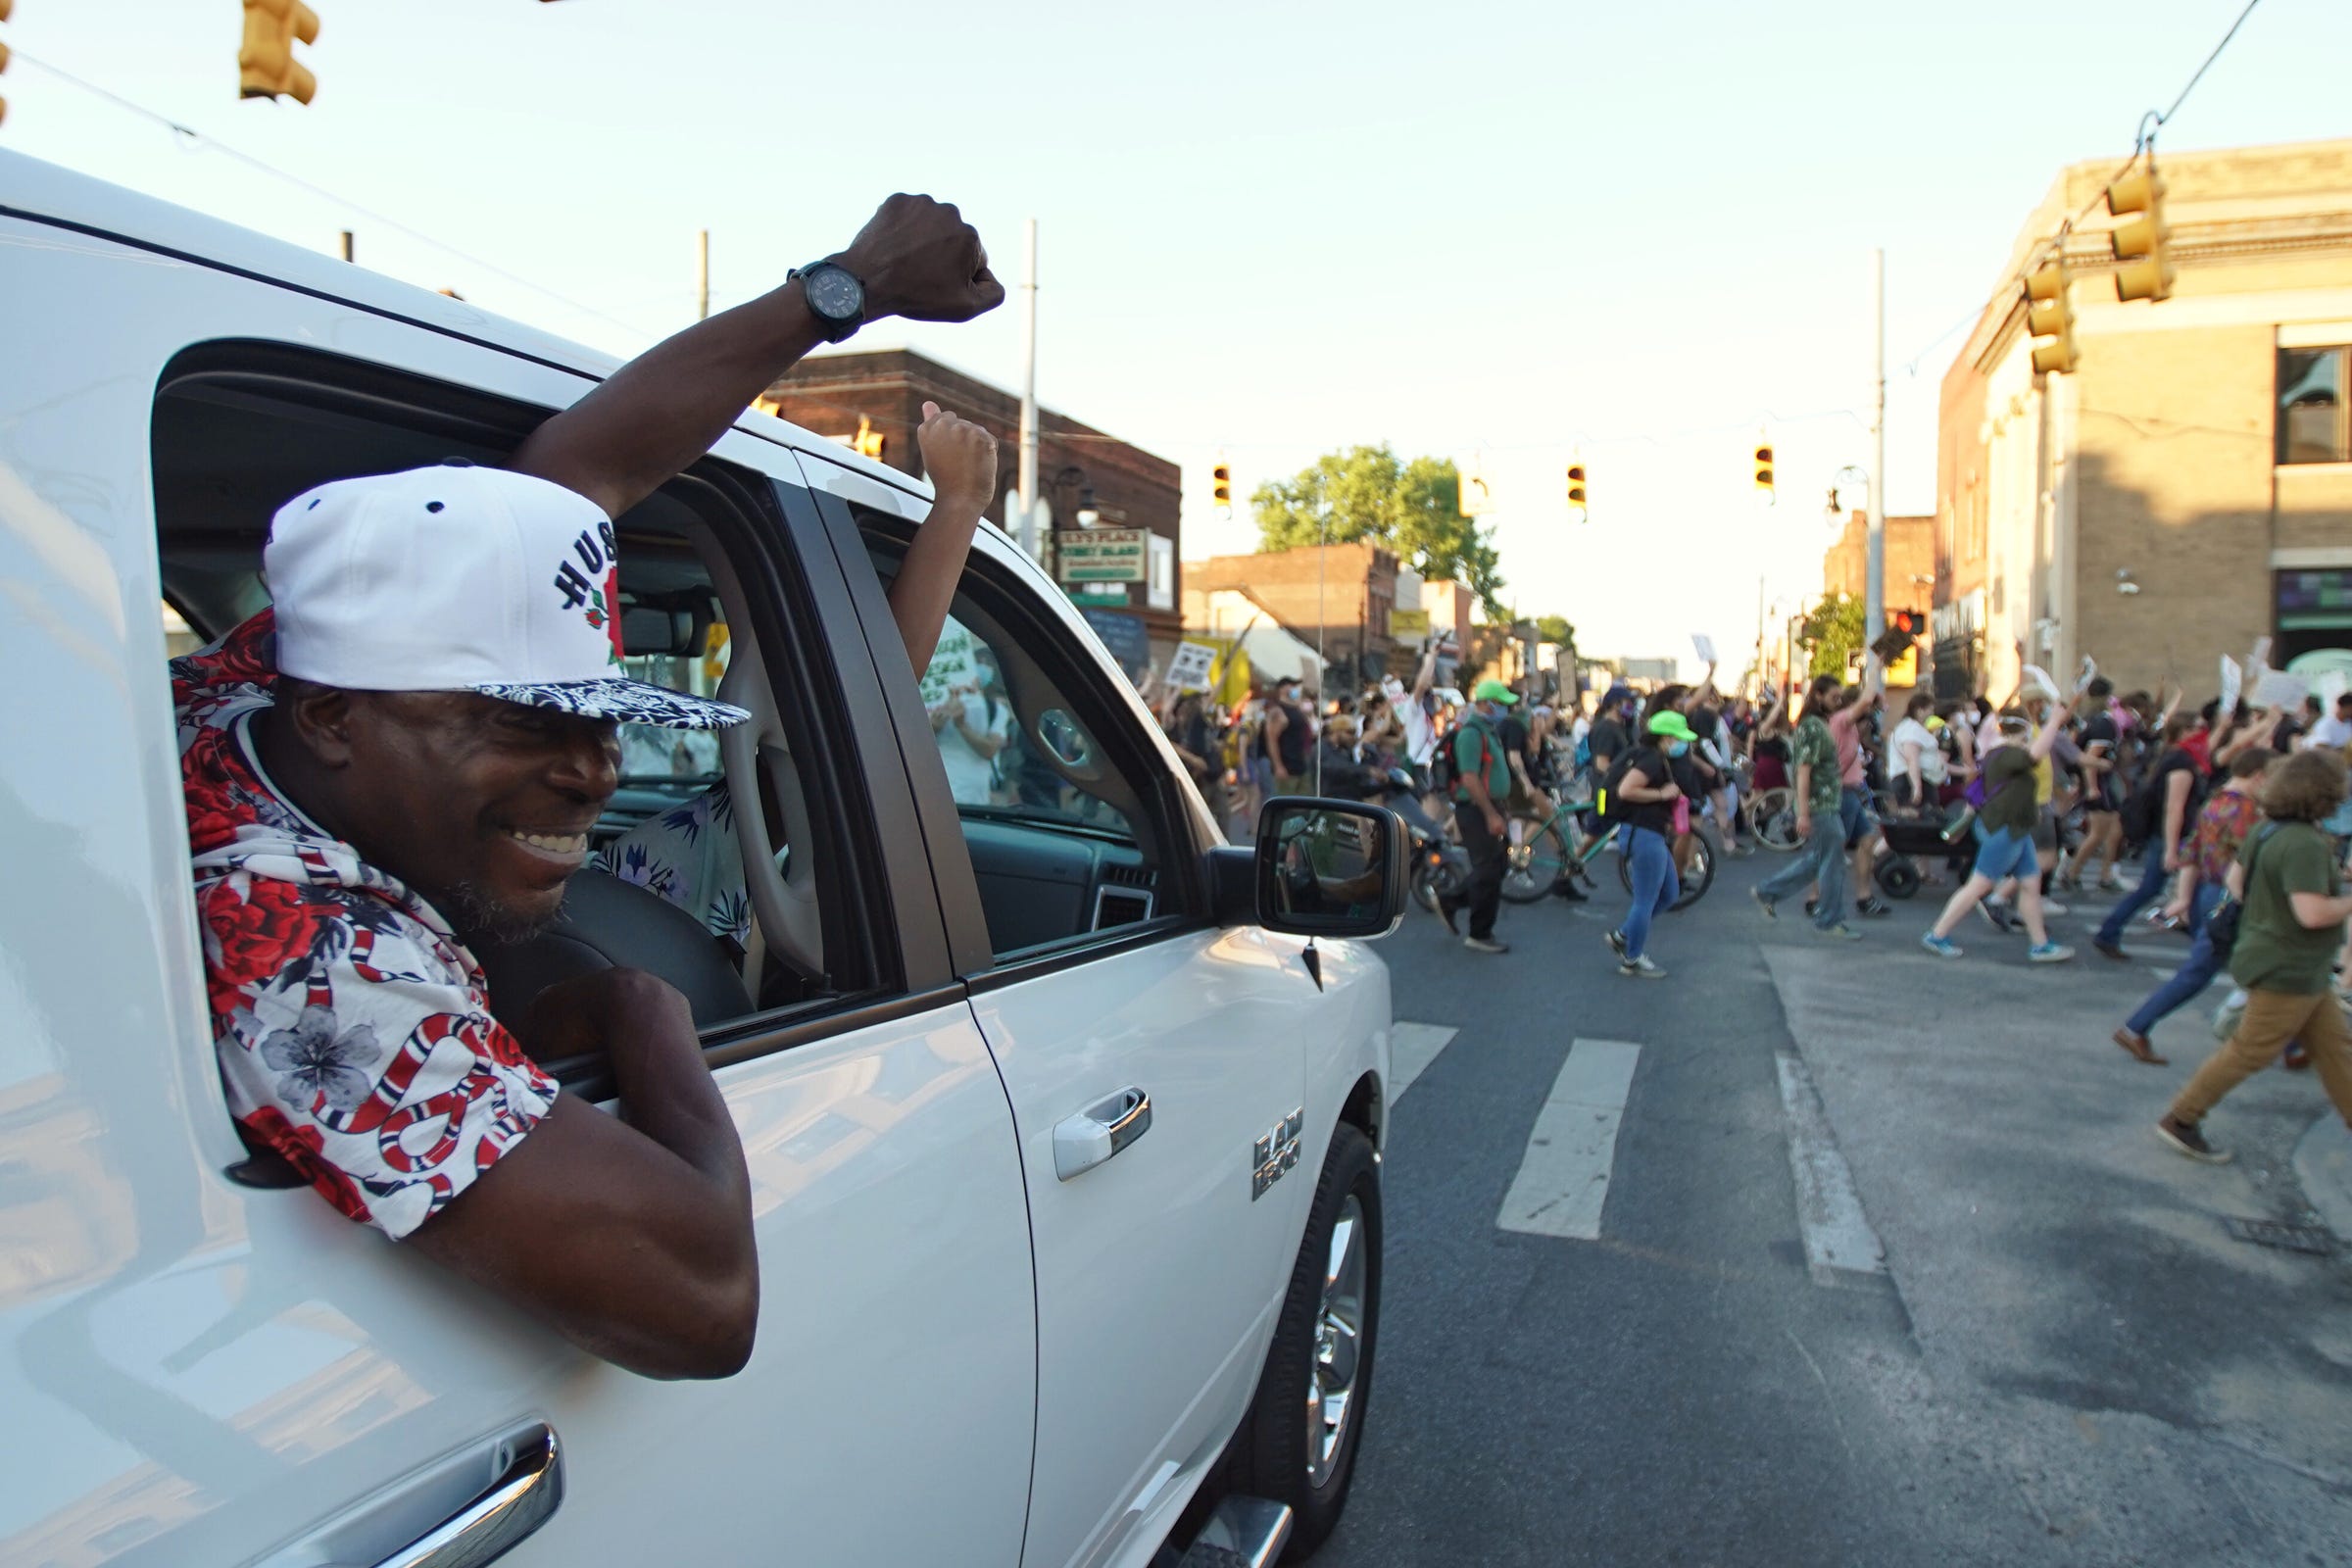 Protesters march in southwest Detroit neighborhood on Monday, June 29, 2020.